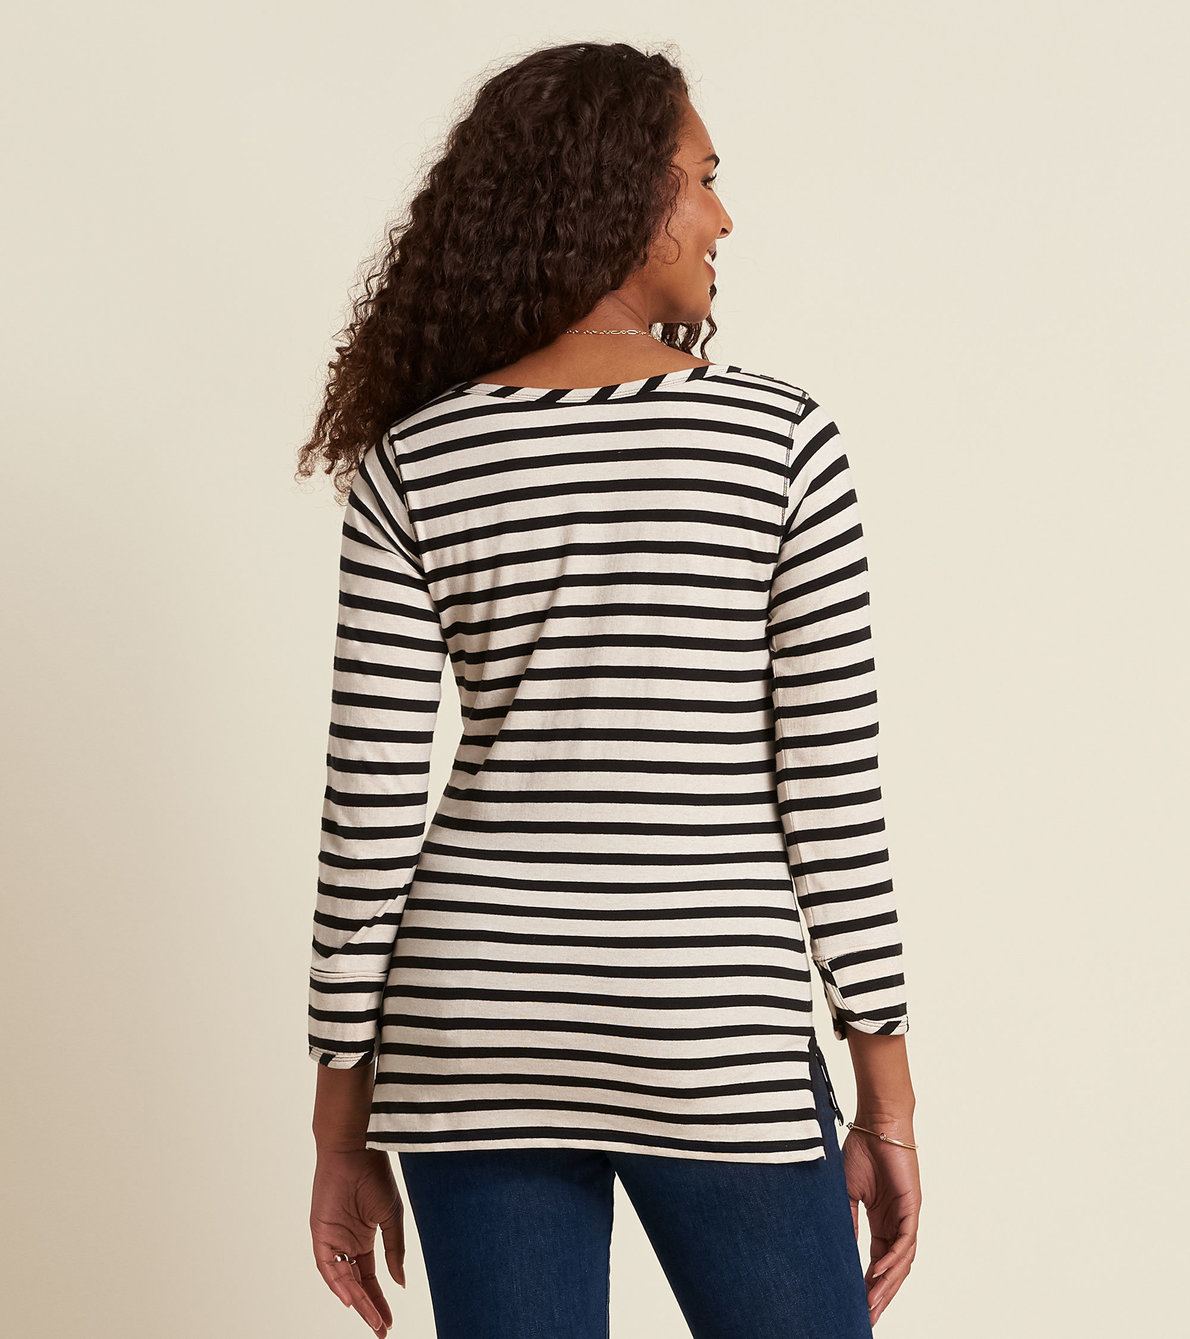 View larger image of 3/4 Sleeve Breton - Black and Oatmeal Stripes